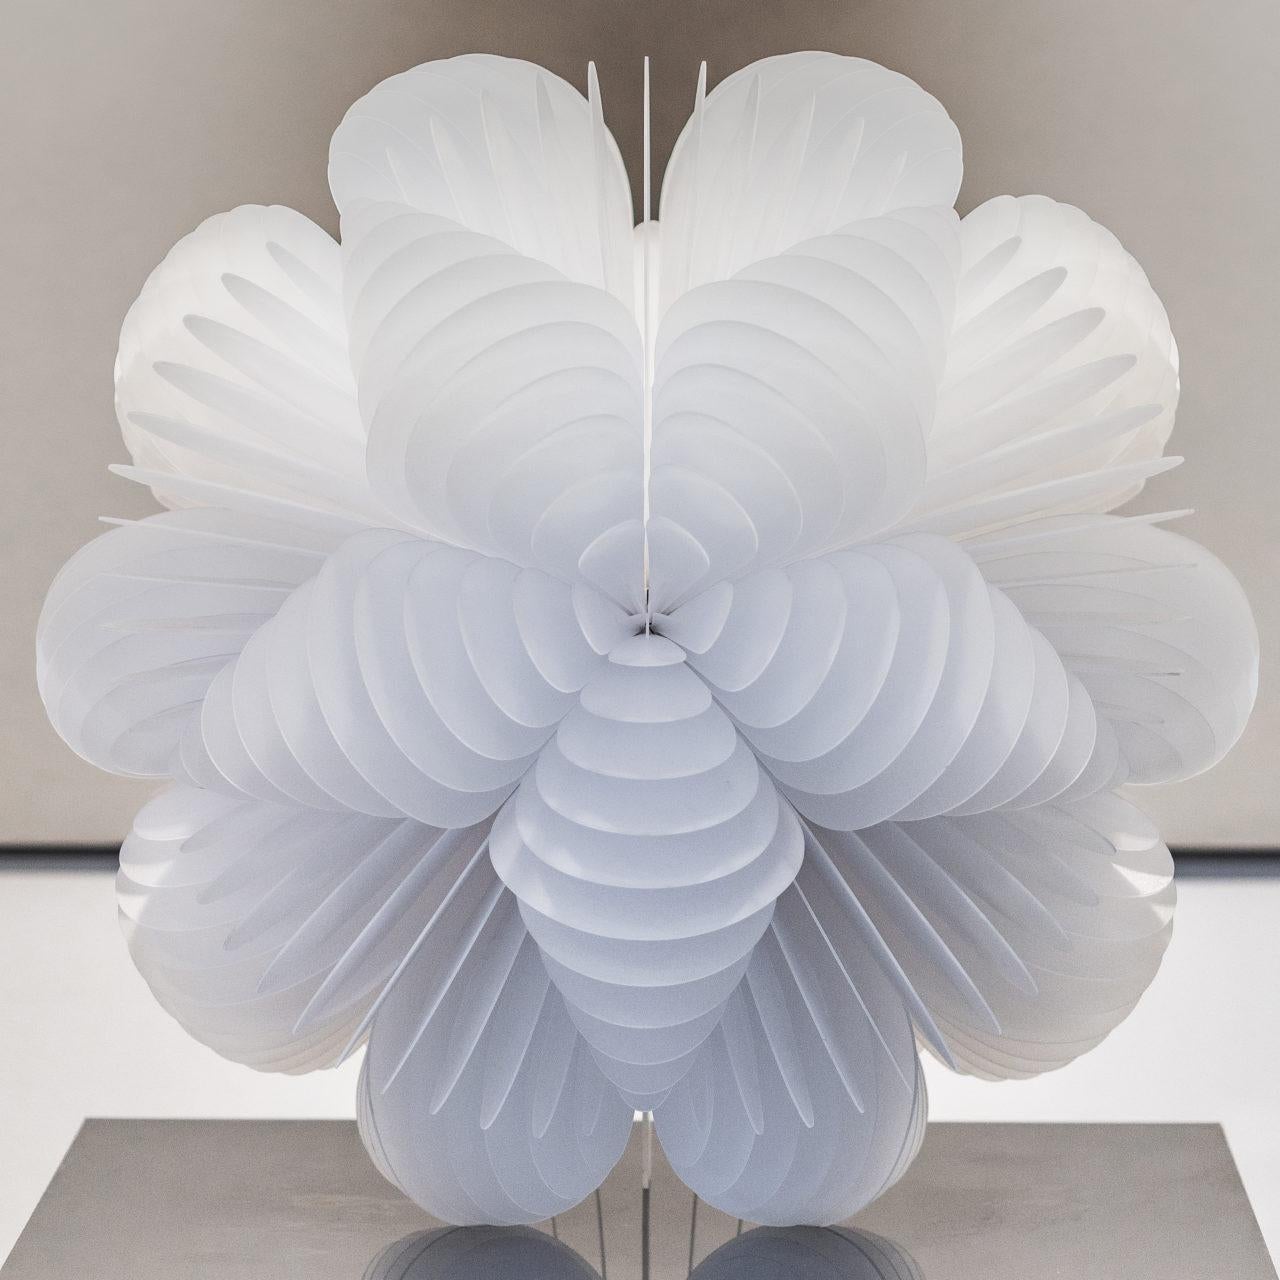 Bloom No. 2 from the Bloom Series by Norman Mooney
White frosted acrylic, mirror-polished stainless steel, birch plywood base
Edition of 3

Inspired by the work of the 19th century biologist Ernst Haeckel and his study of microbes, the Bloom series